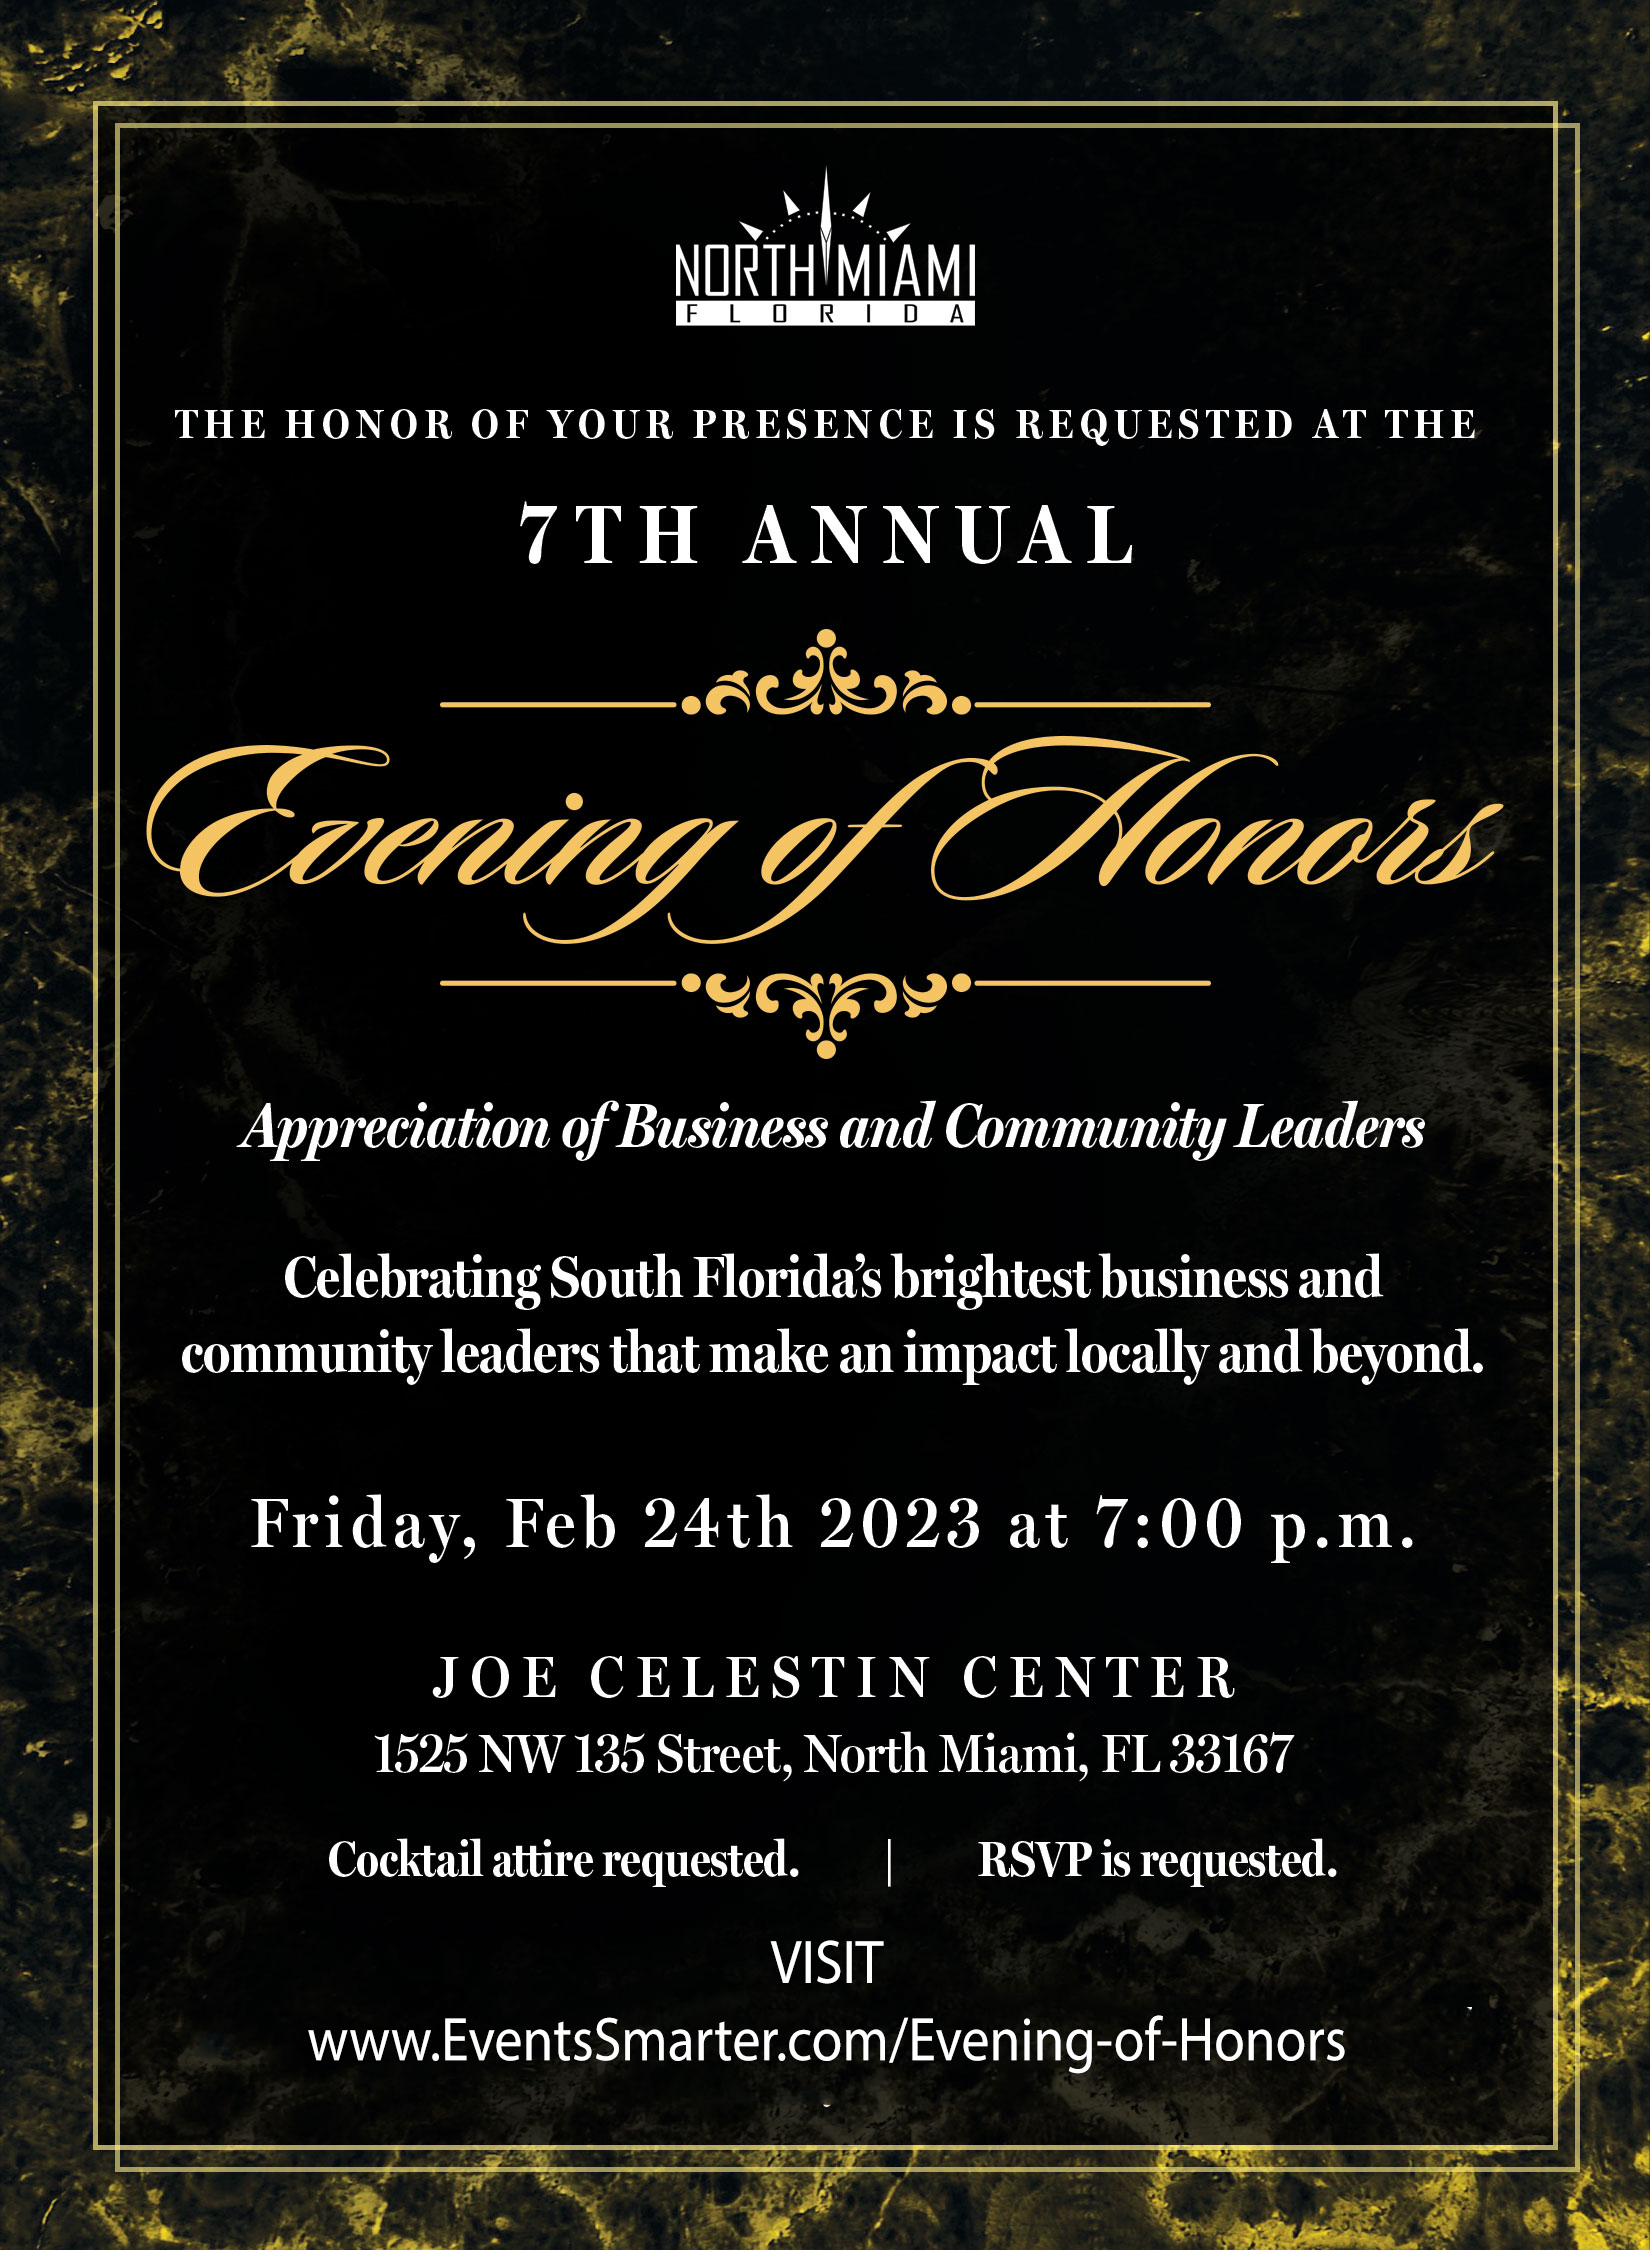 7th Annual Evening of Honors